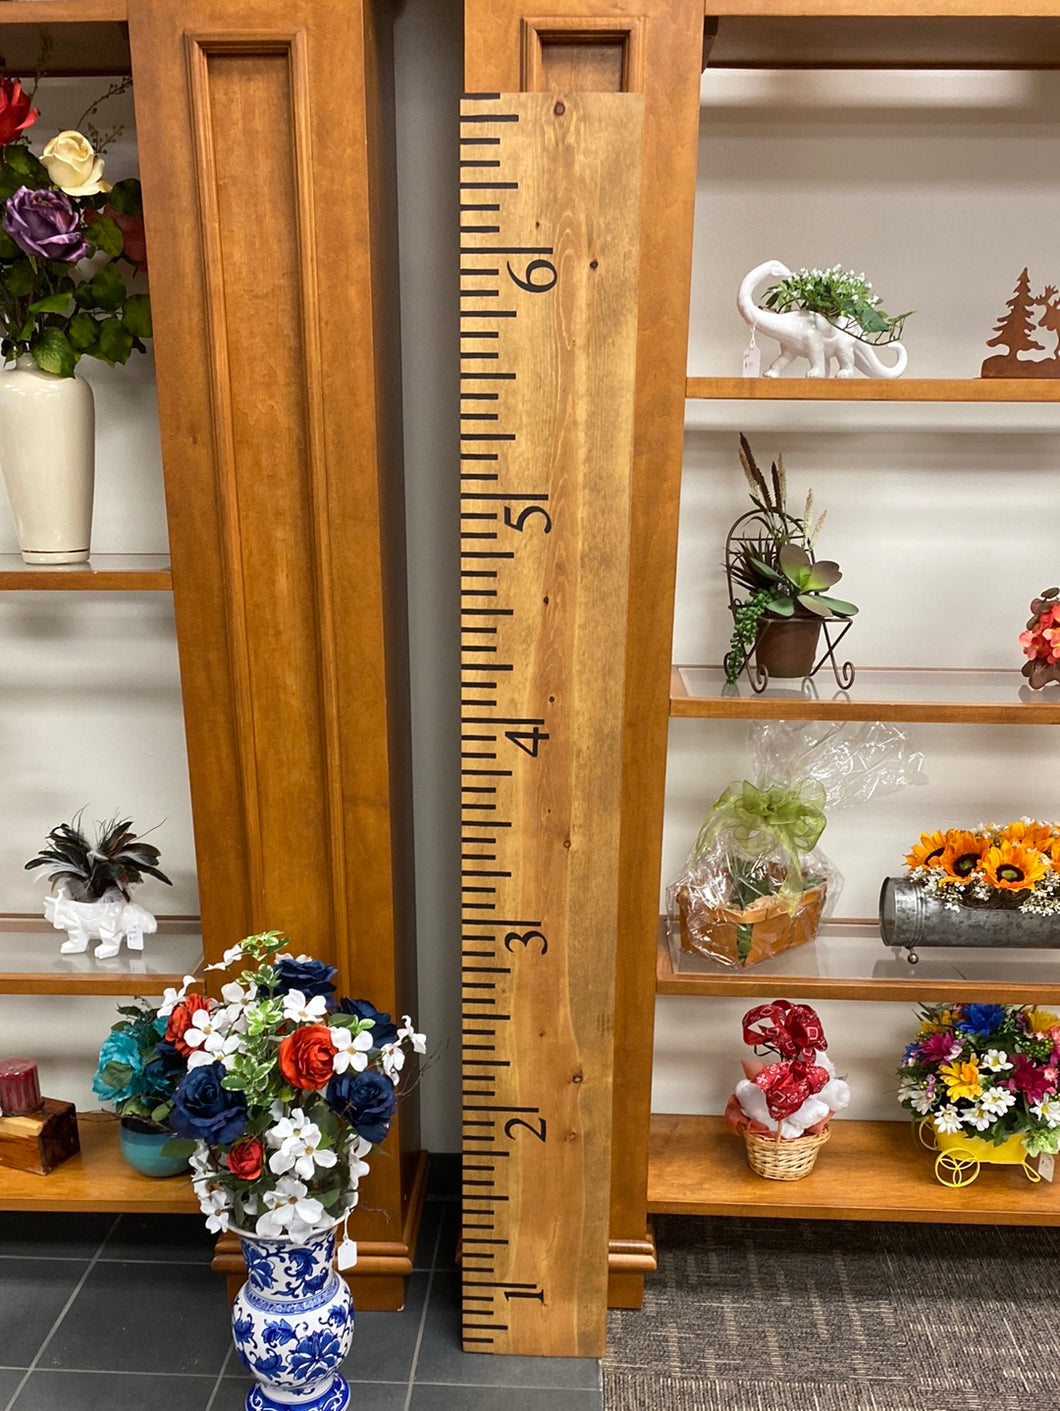 7ft Wood Growth Charts - VNDR In Stitches